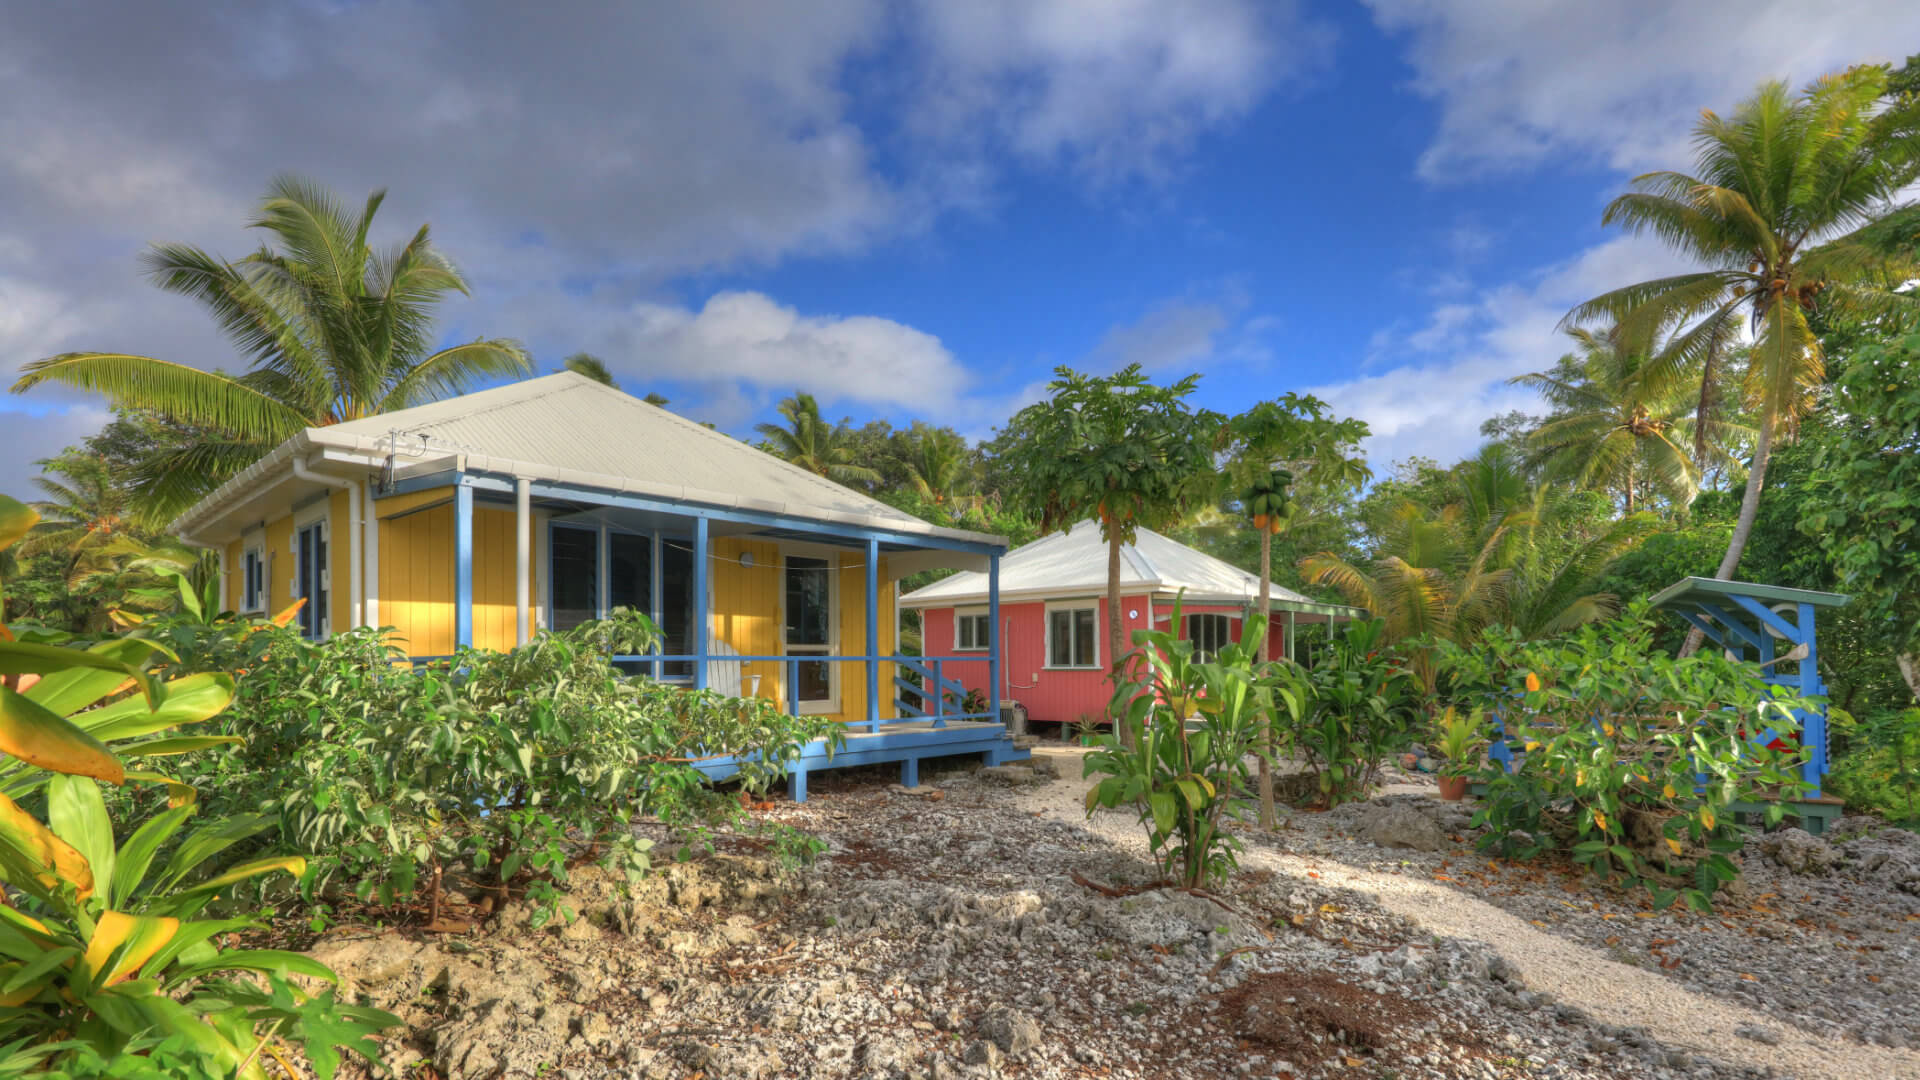 Niue, Breeze Accommodation, Self-contained cottages, Island retreat, 1920x1080 Full HD Desktop